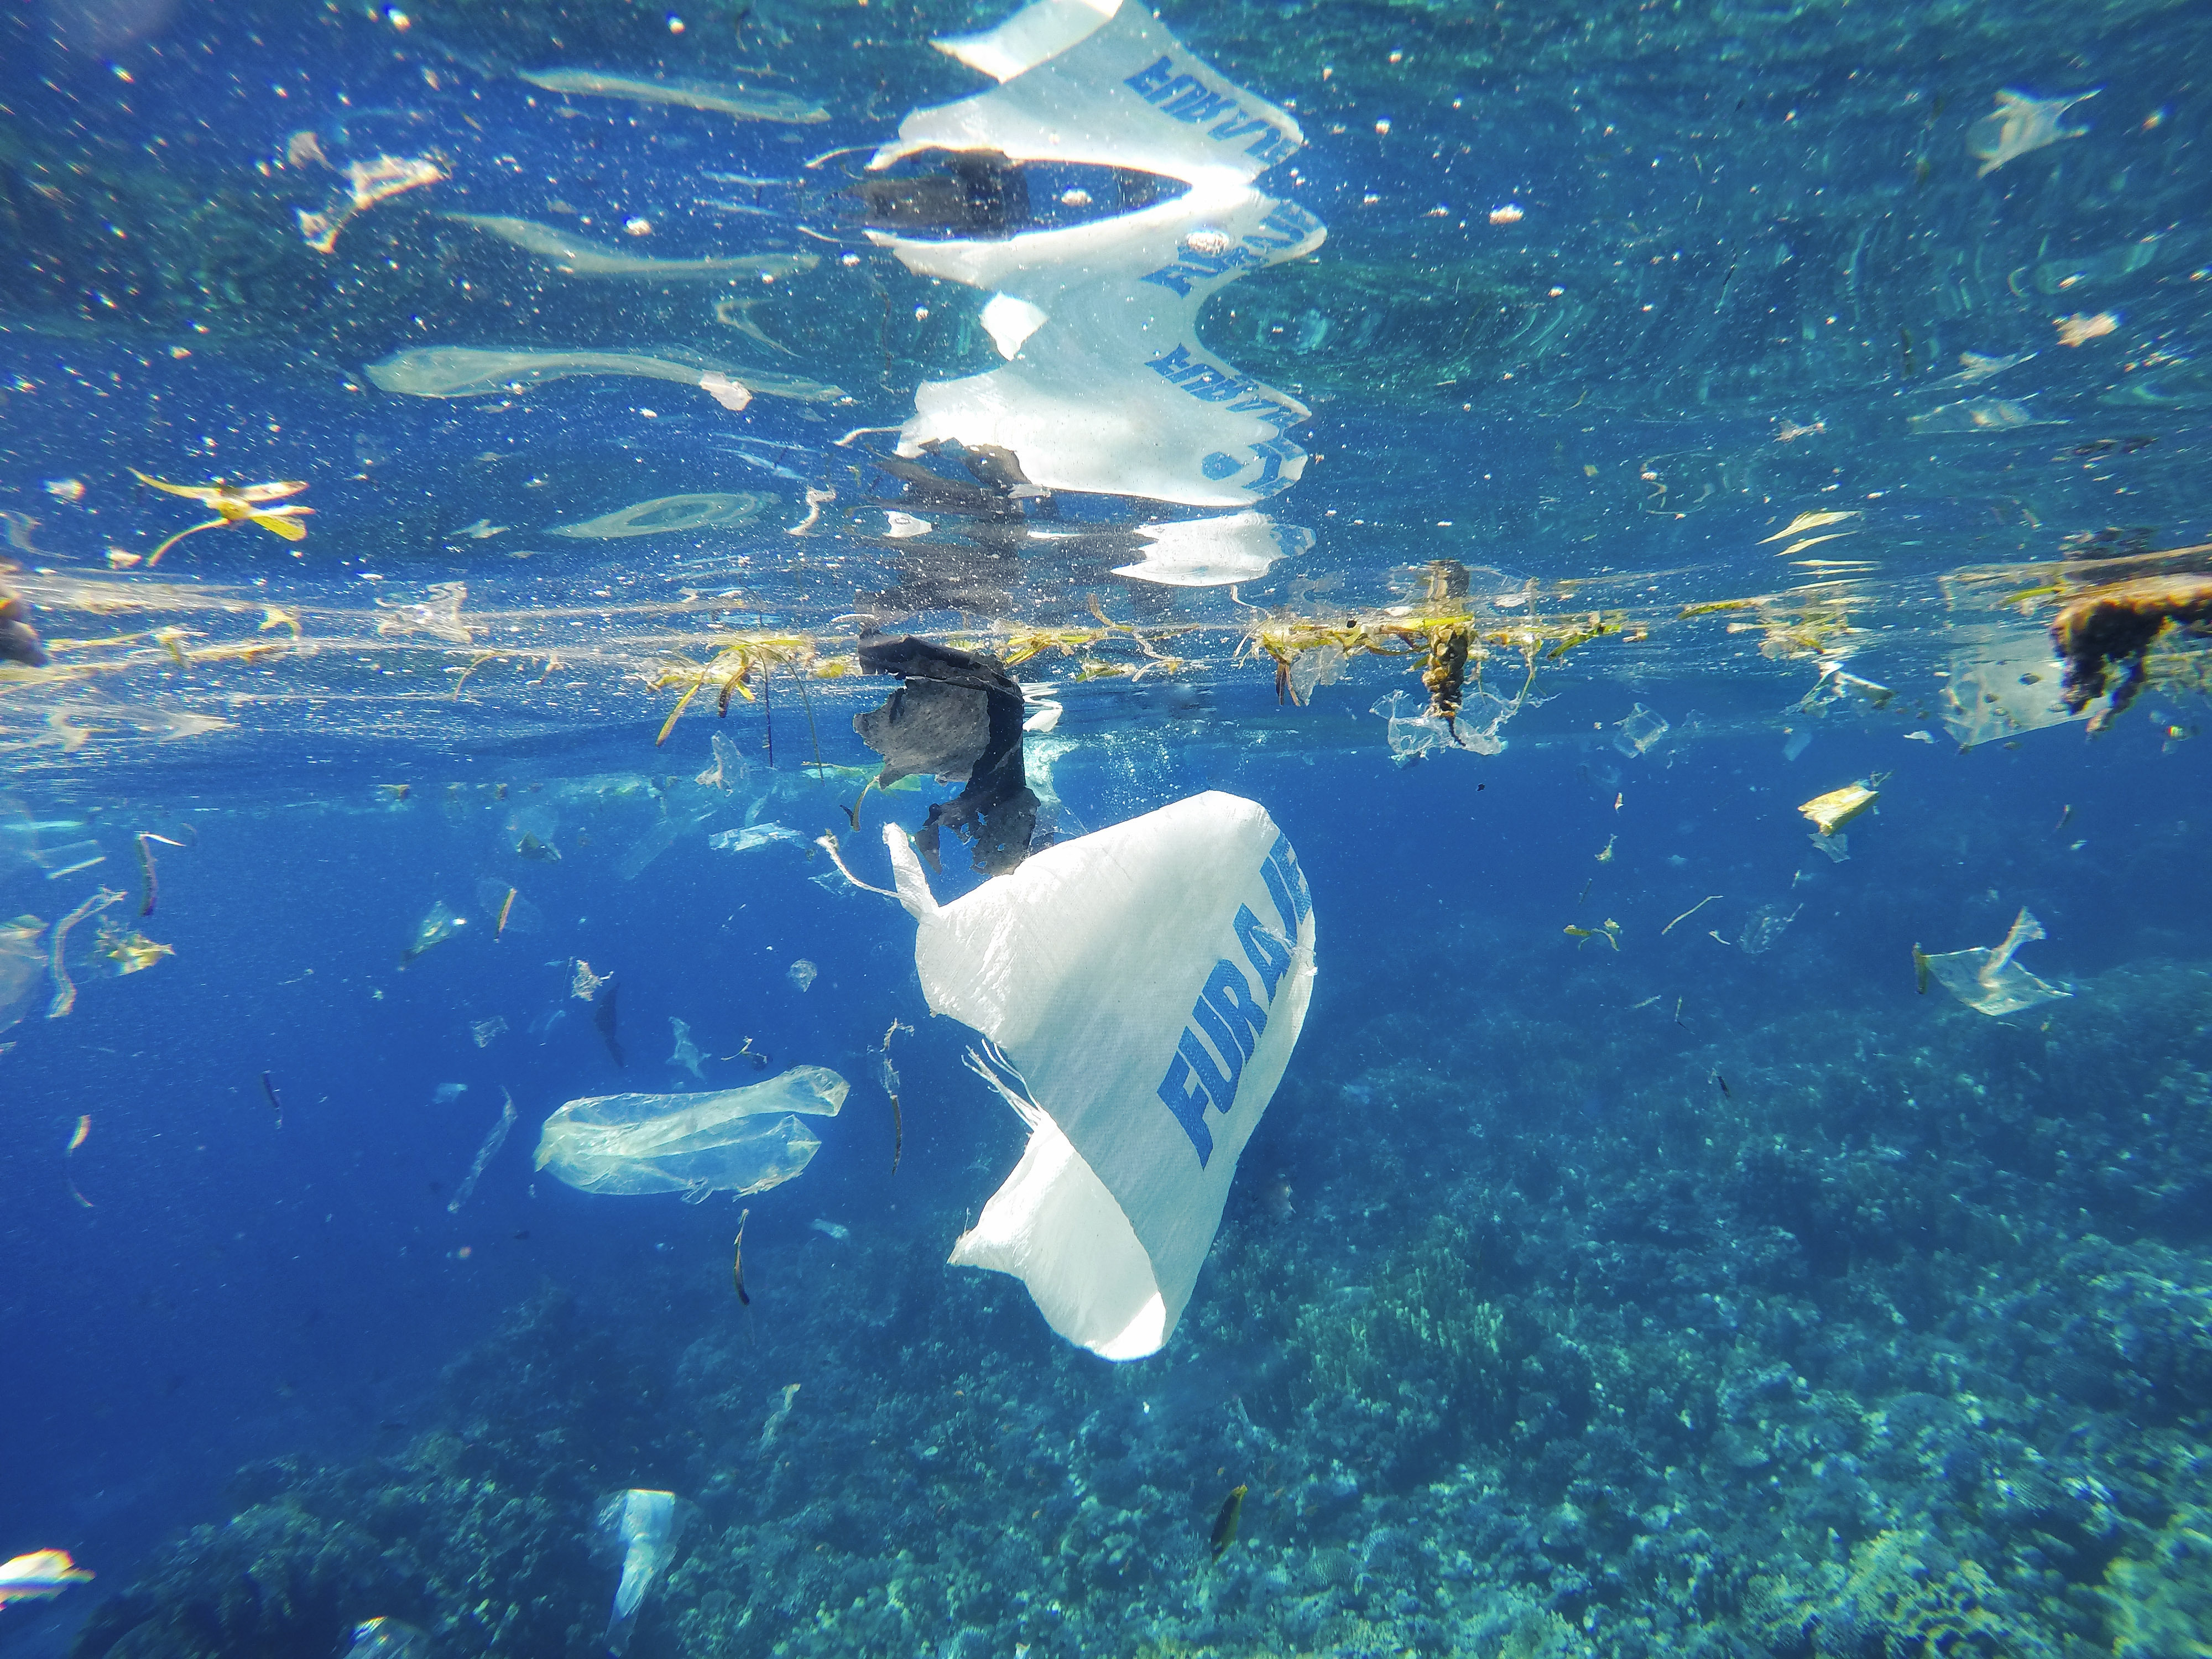 NGOS ALONE WILL NOT TURN THE TIDE ON OCEAN TRASH